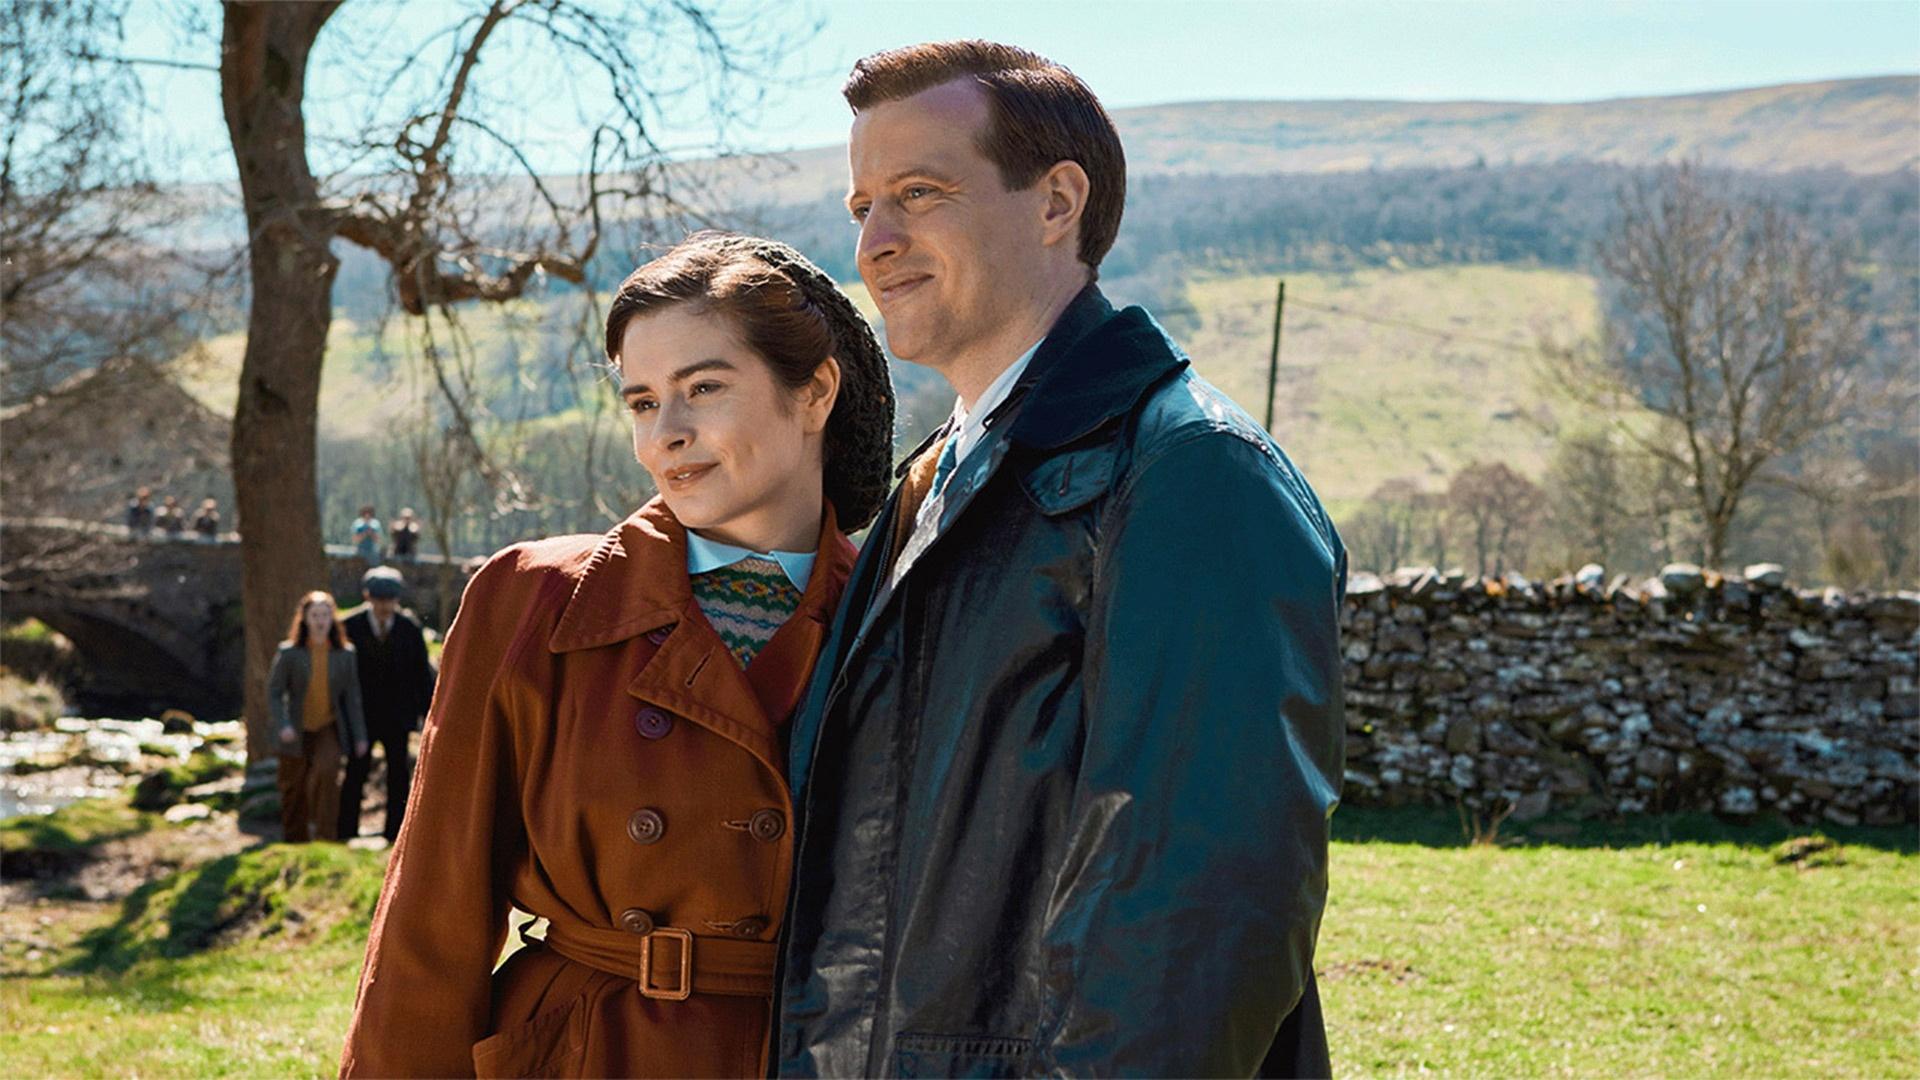 James and Helen together outdoors in the countryside, in coats and smiling